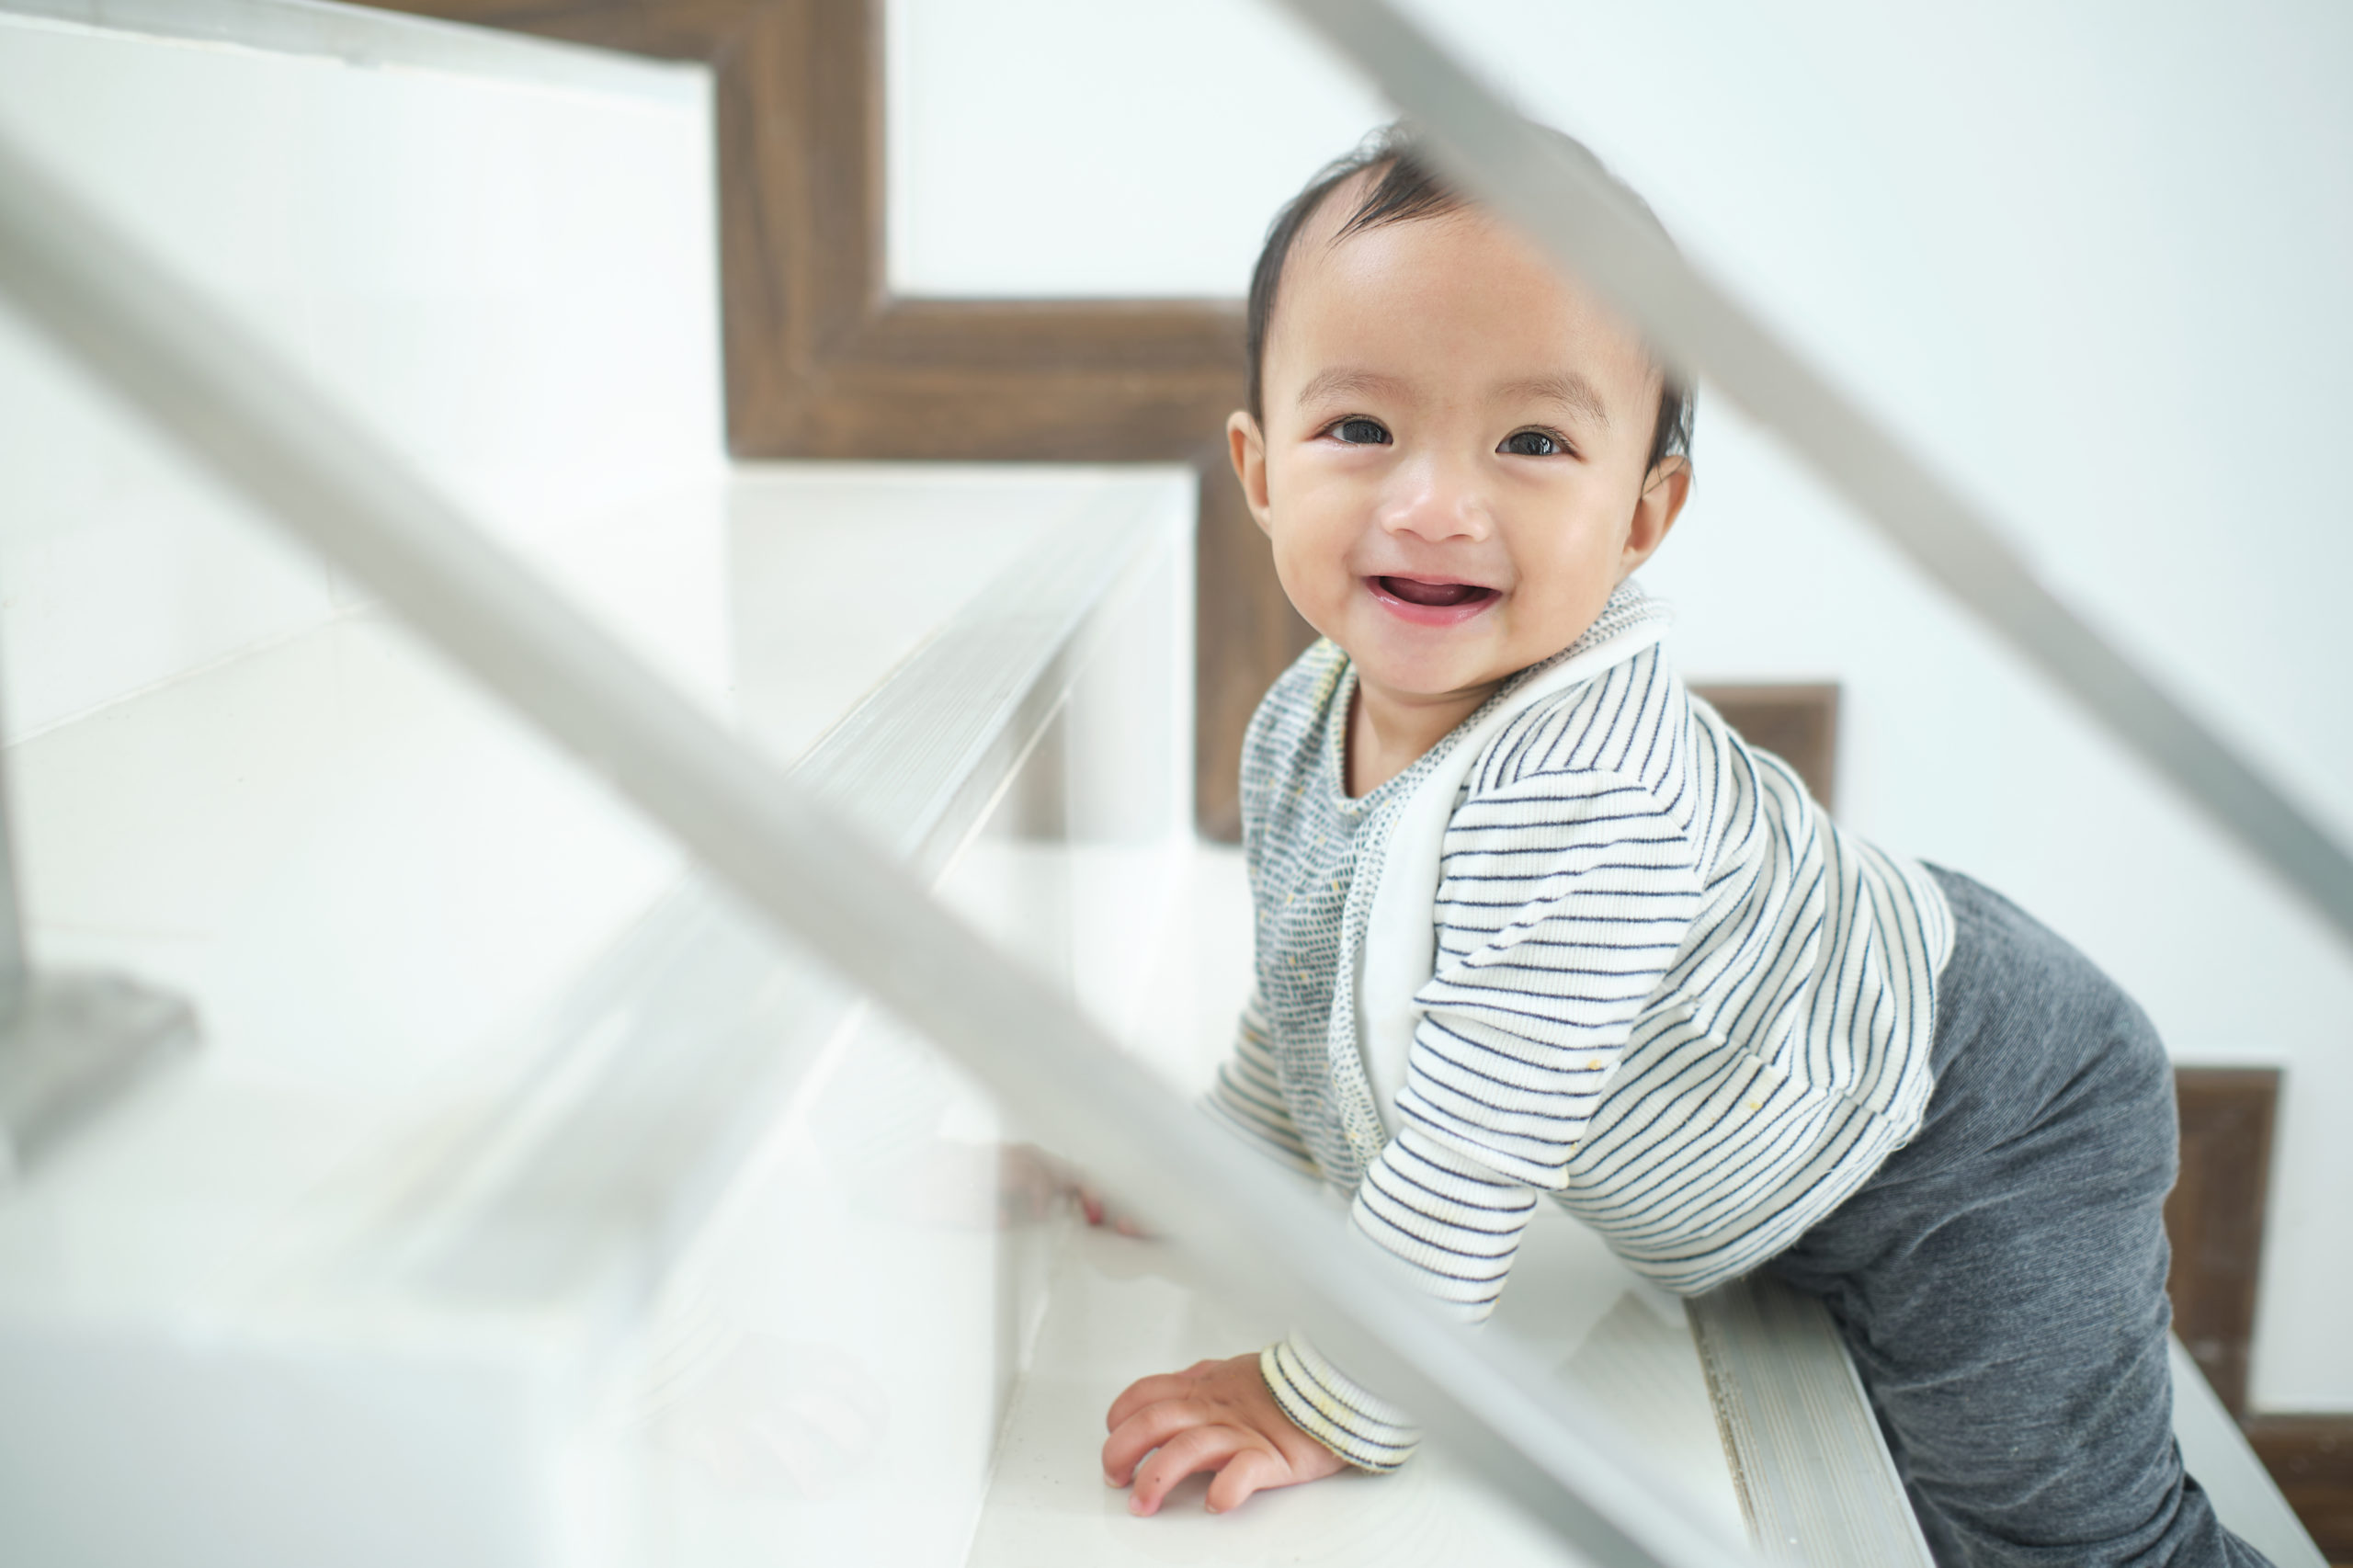 Childproofing Tips for New Parents at Kids 'R' Kids Tomball, preschool, daycare, childcare